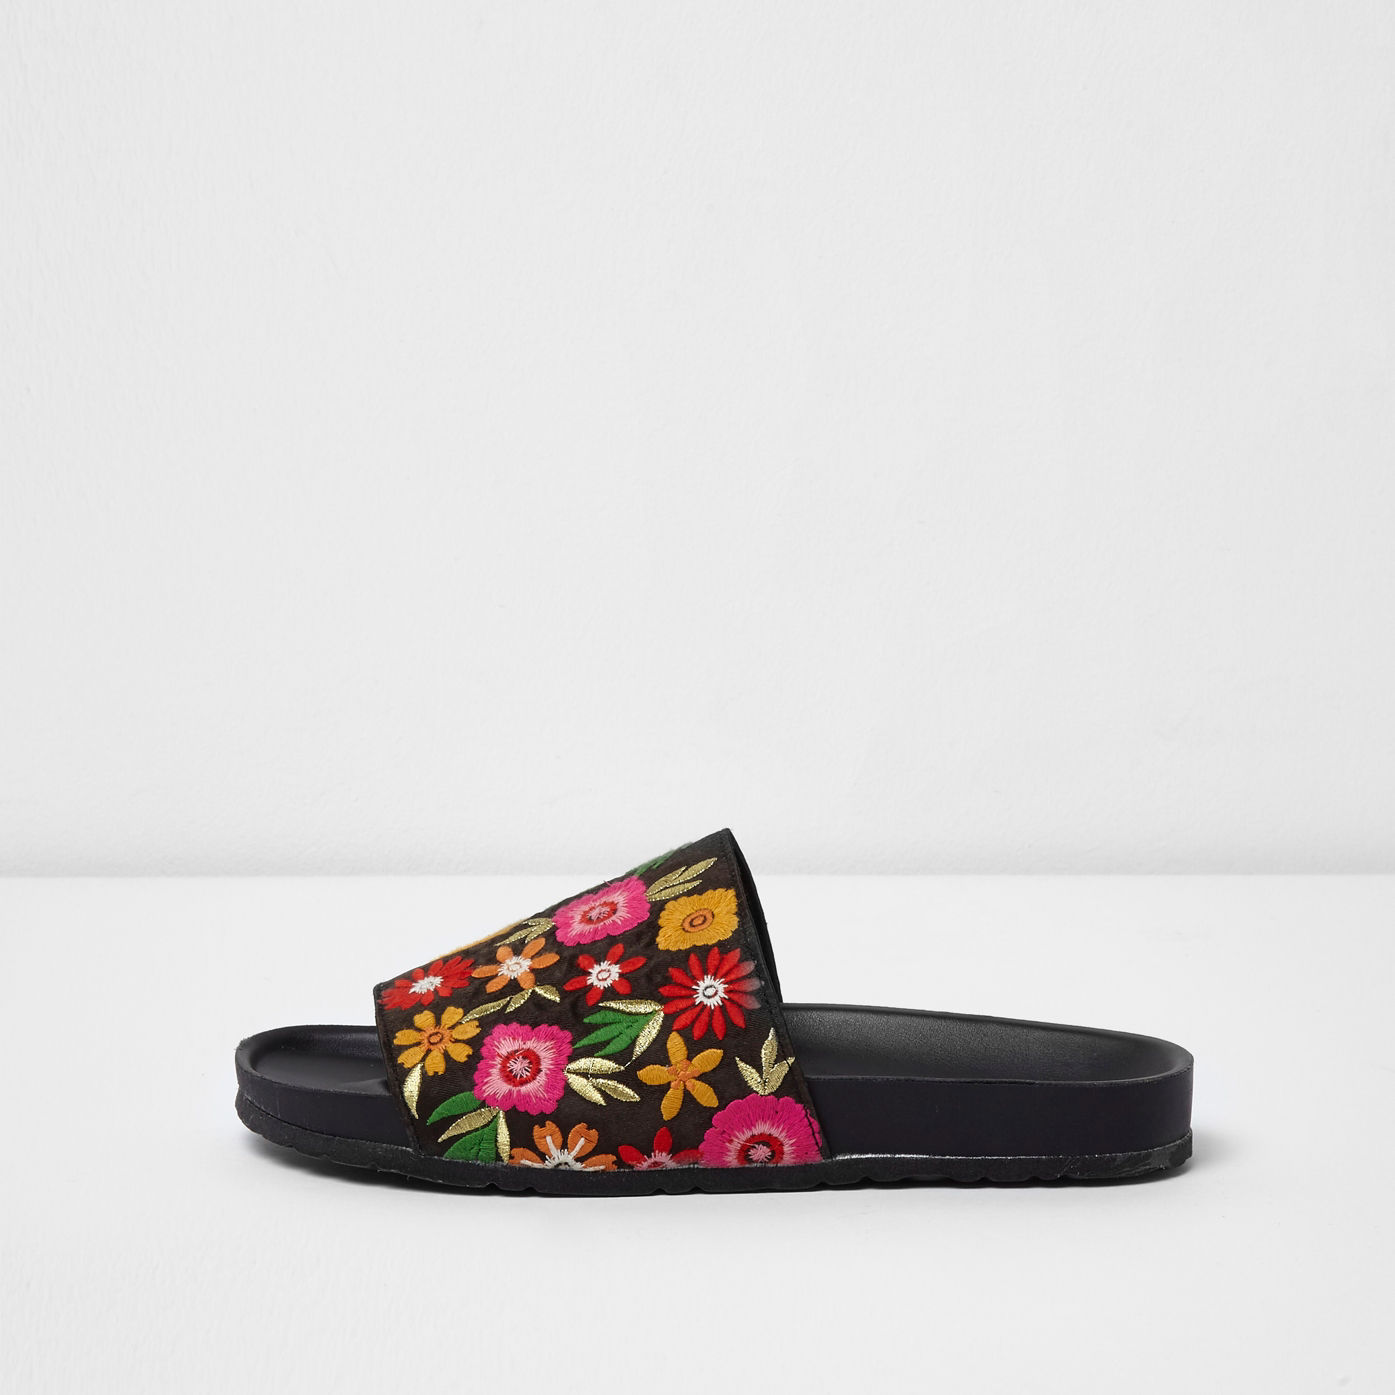 River Island Embroidered Sliders